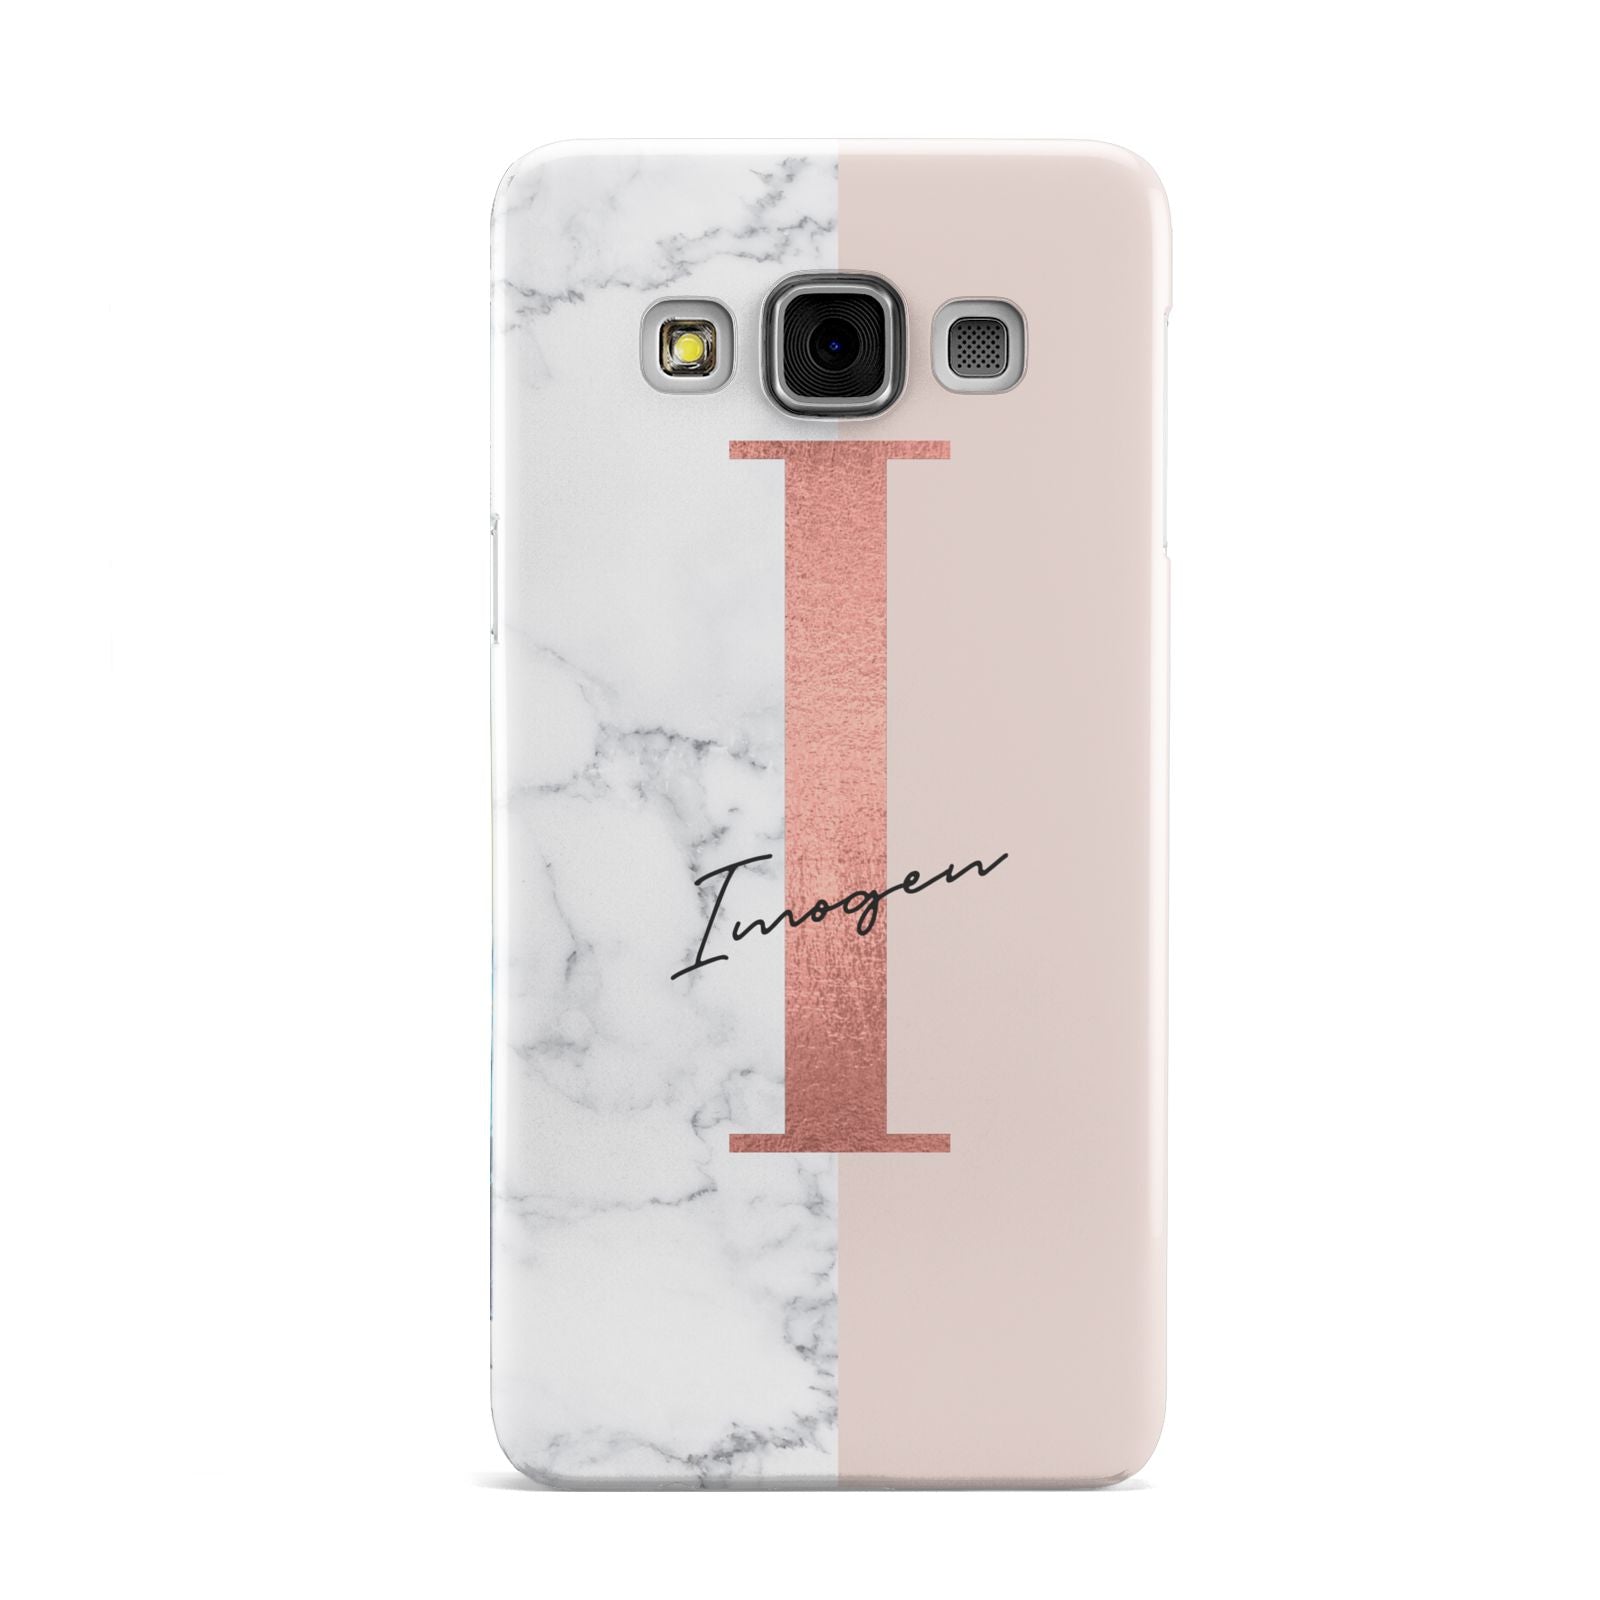 Monogrammed Rose Gold Marble Samsung Galaxy A3 Case